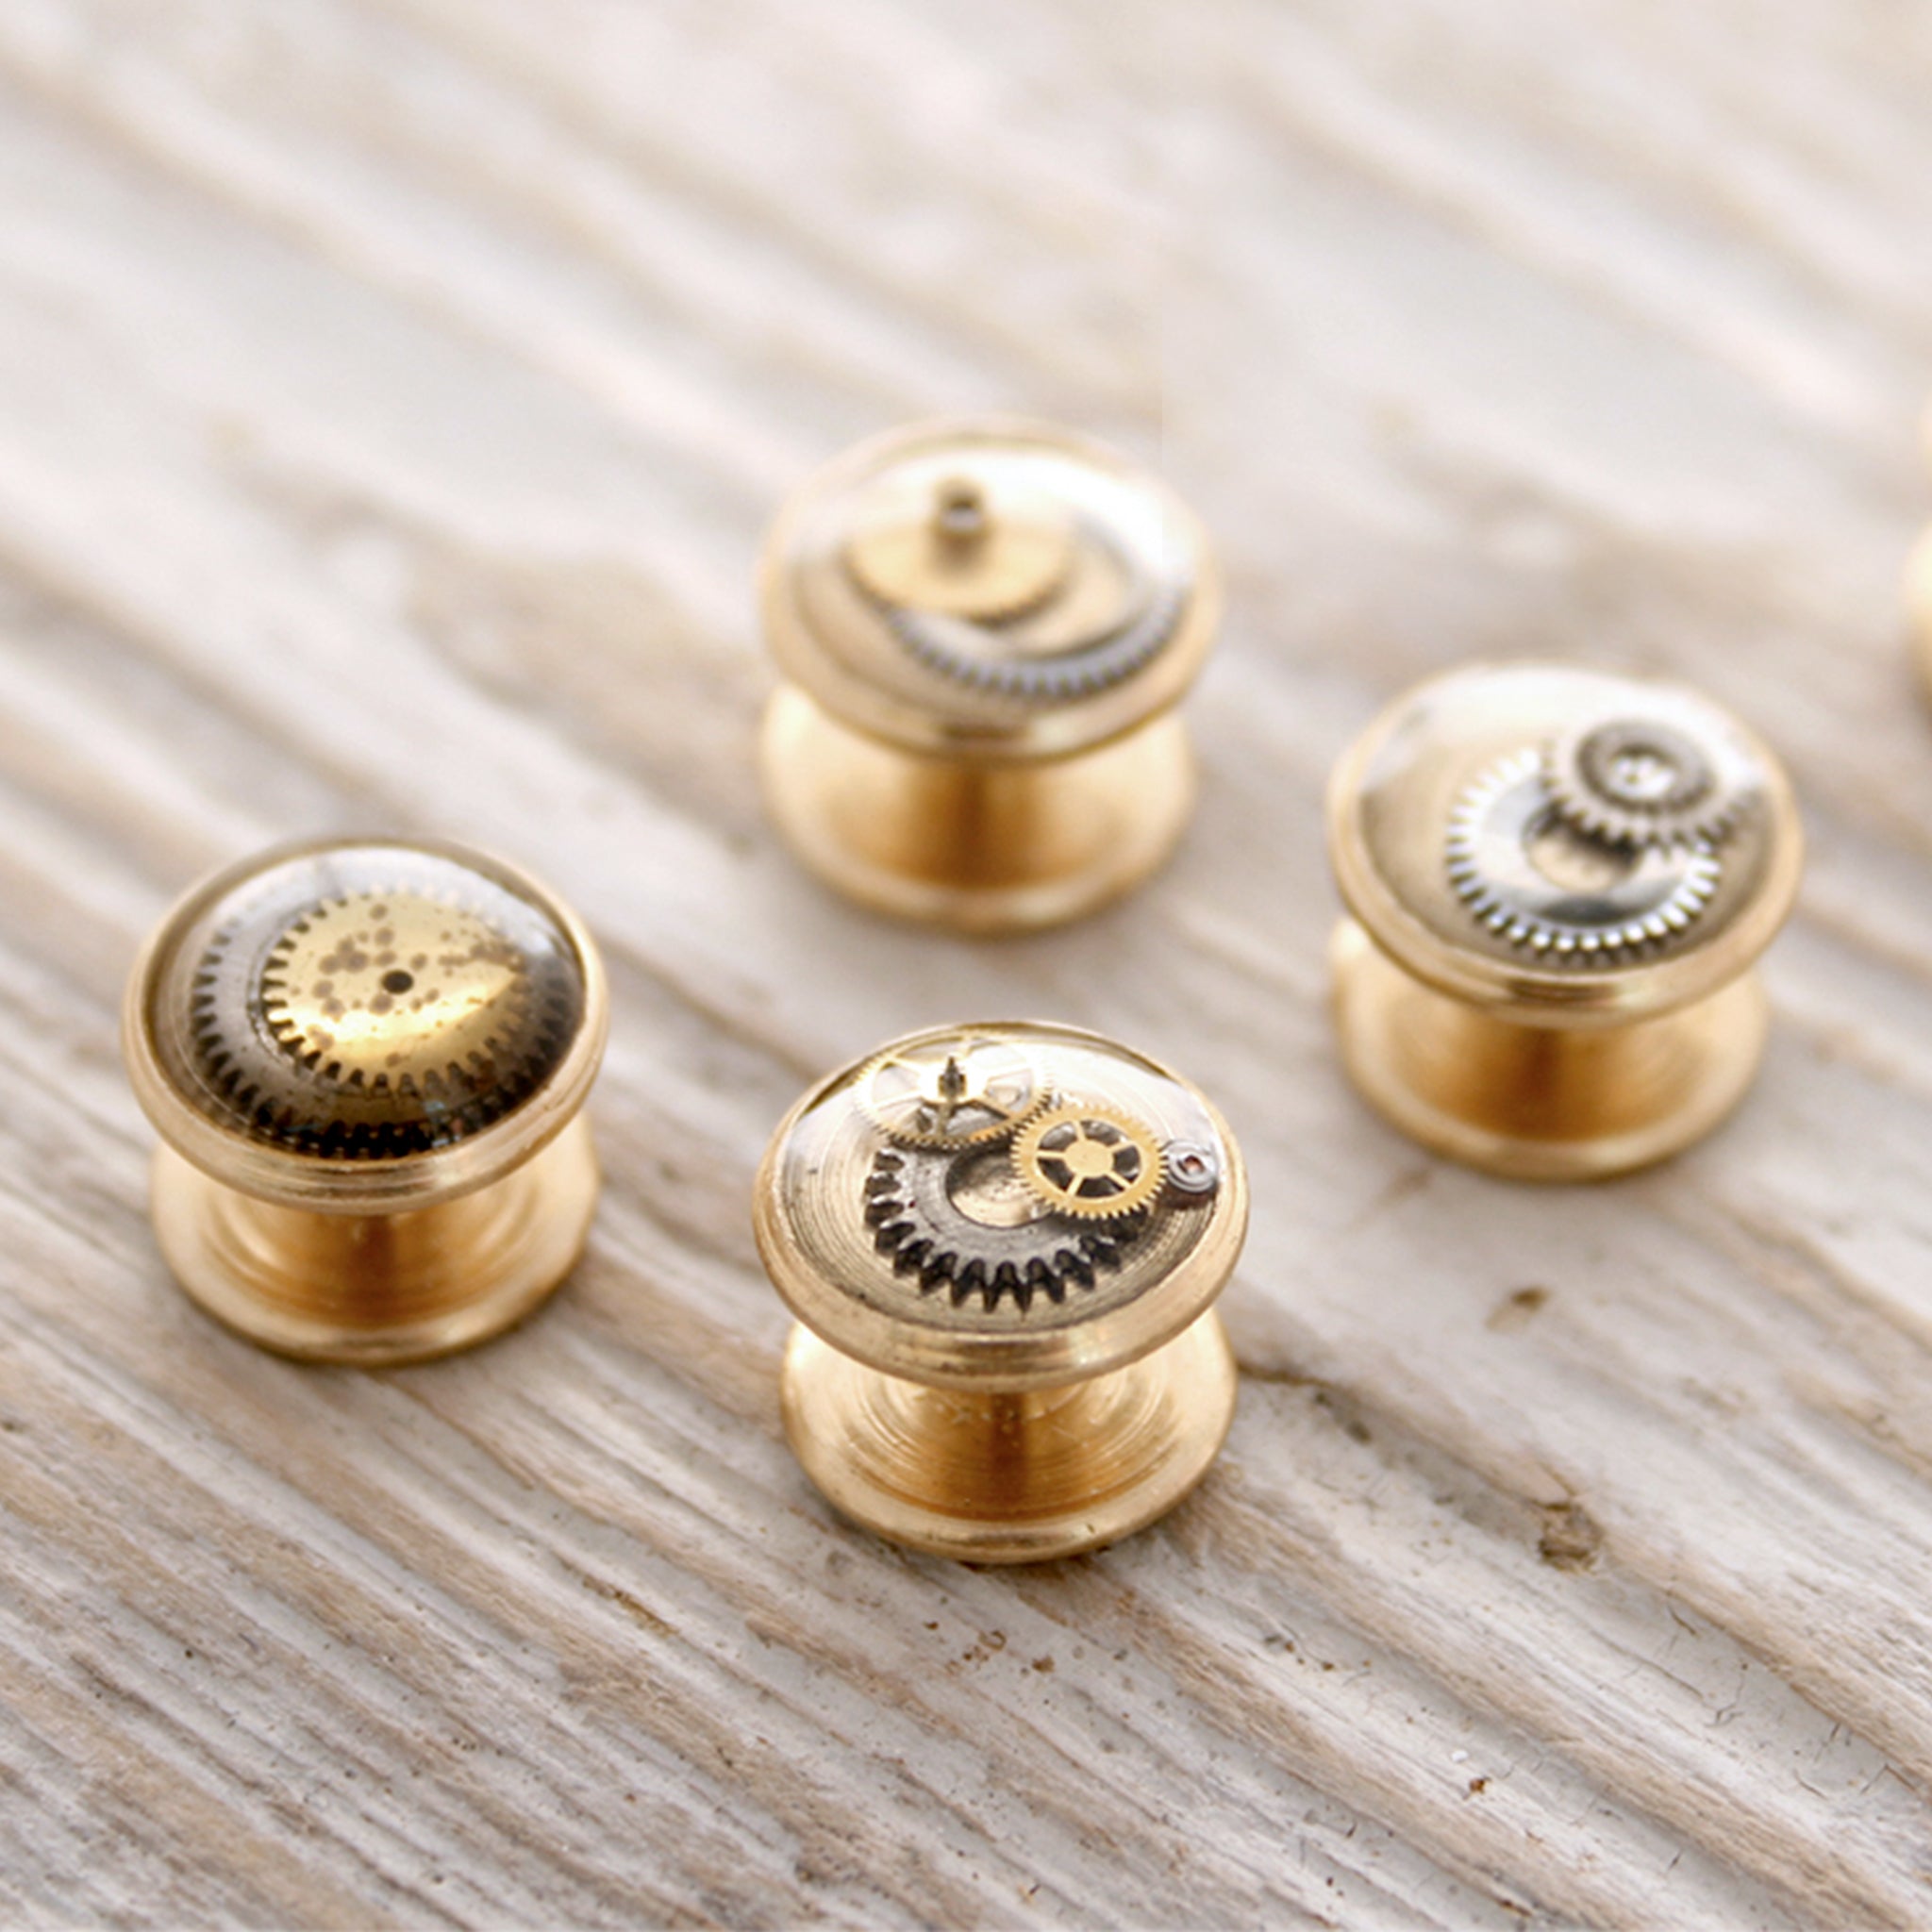 Little tuxedo studs made of raw brass, watch parts and resin